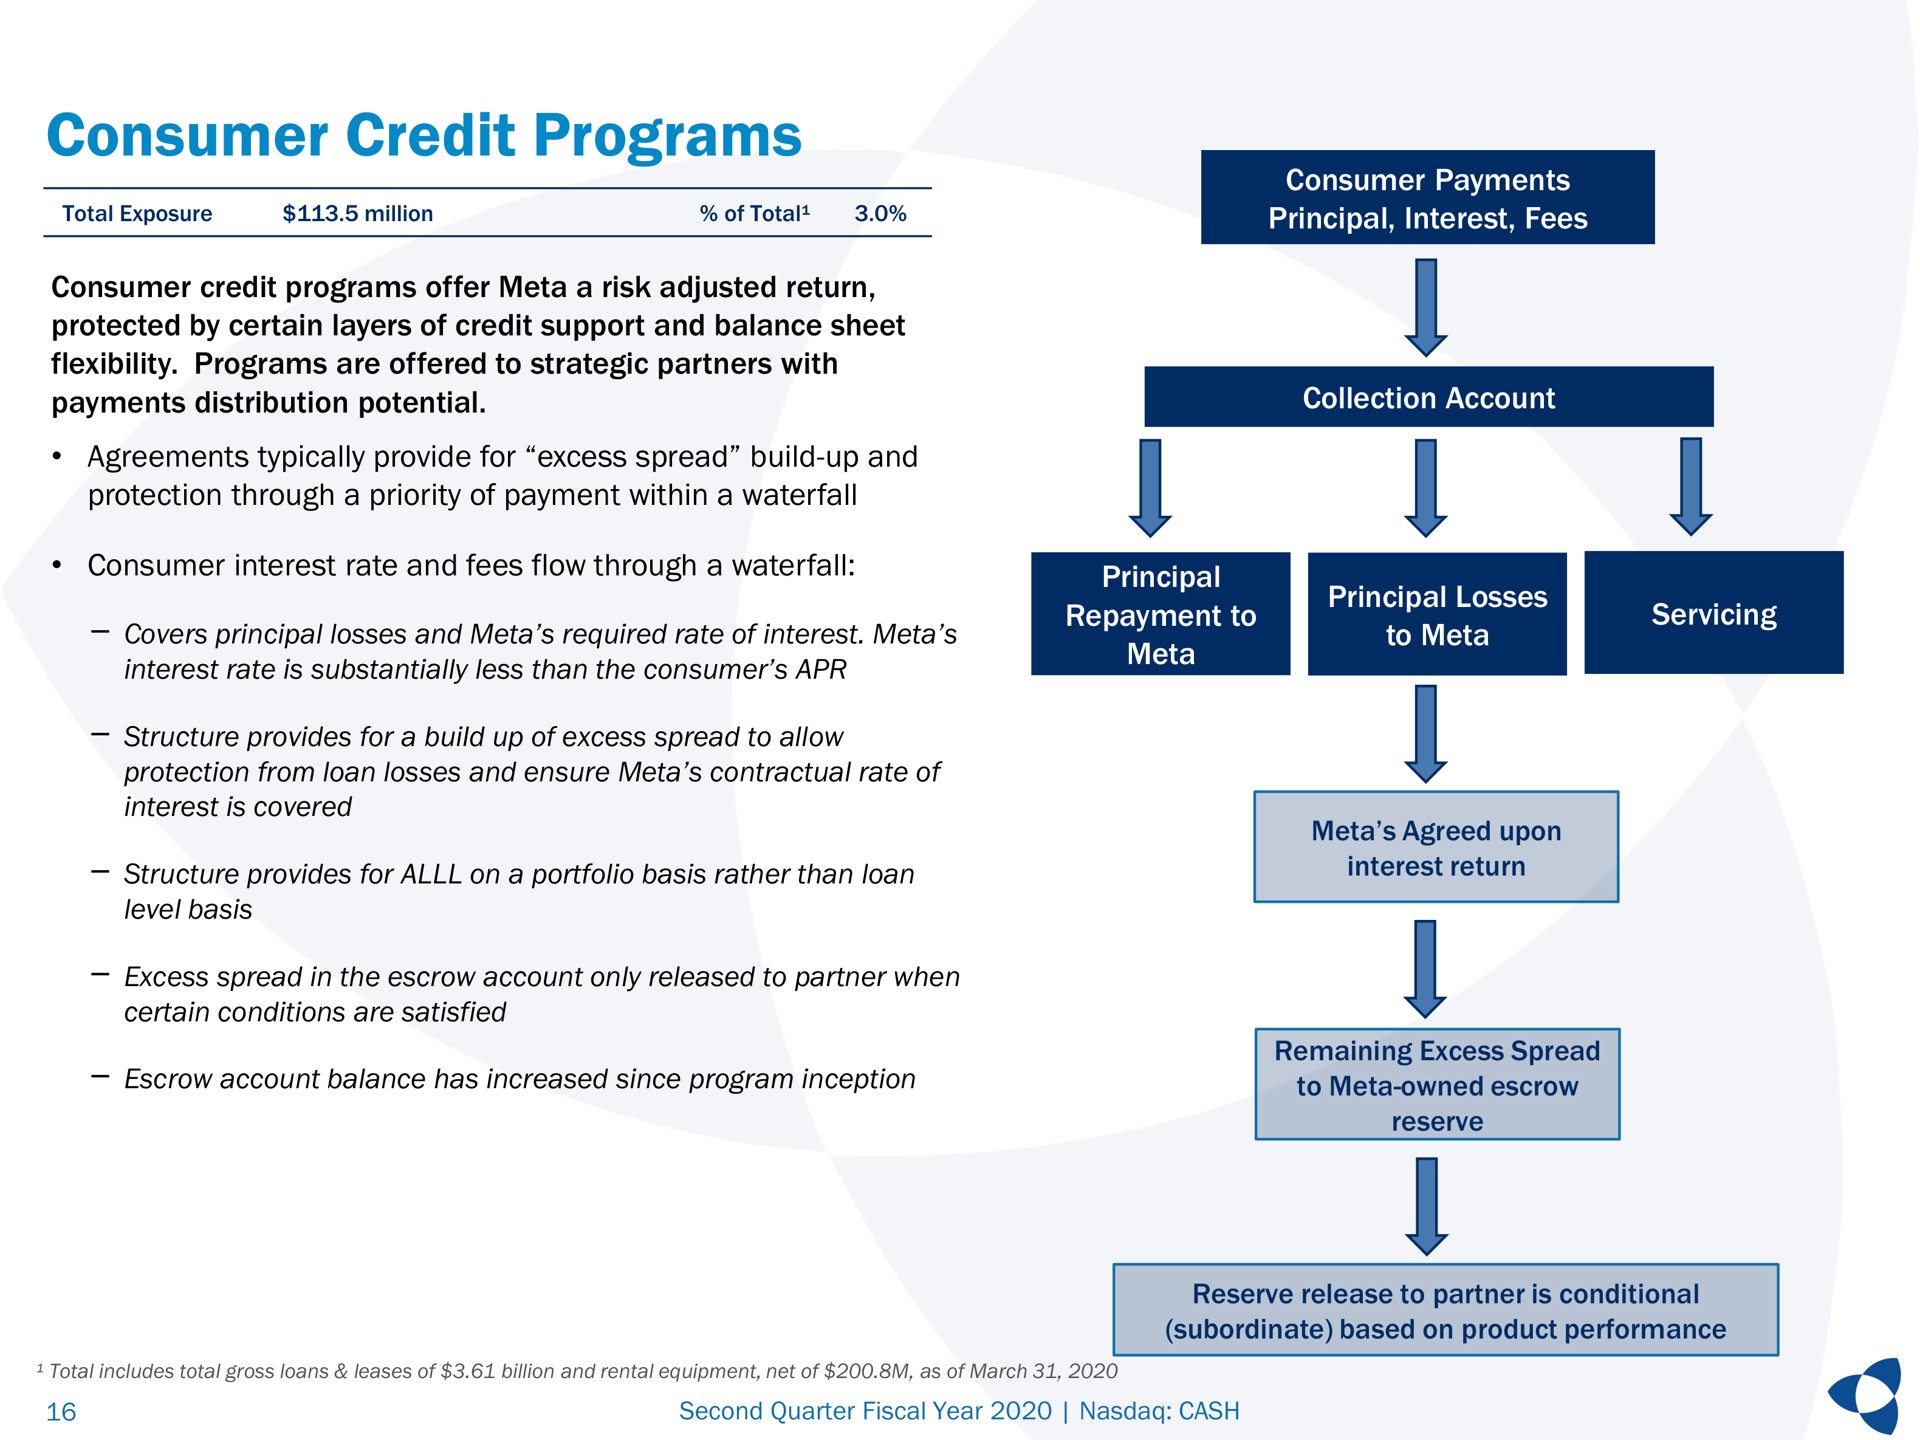 consumer credit programs agreements typically provide for excess spread build up and structure provides for on a portfolio basis rather than loan repayment to principal losses interest return | Pathward Financial